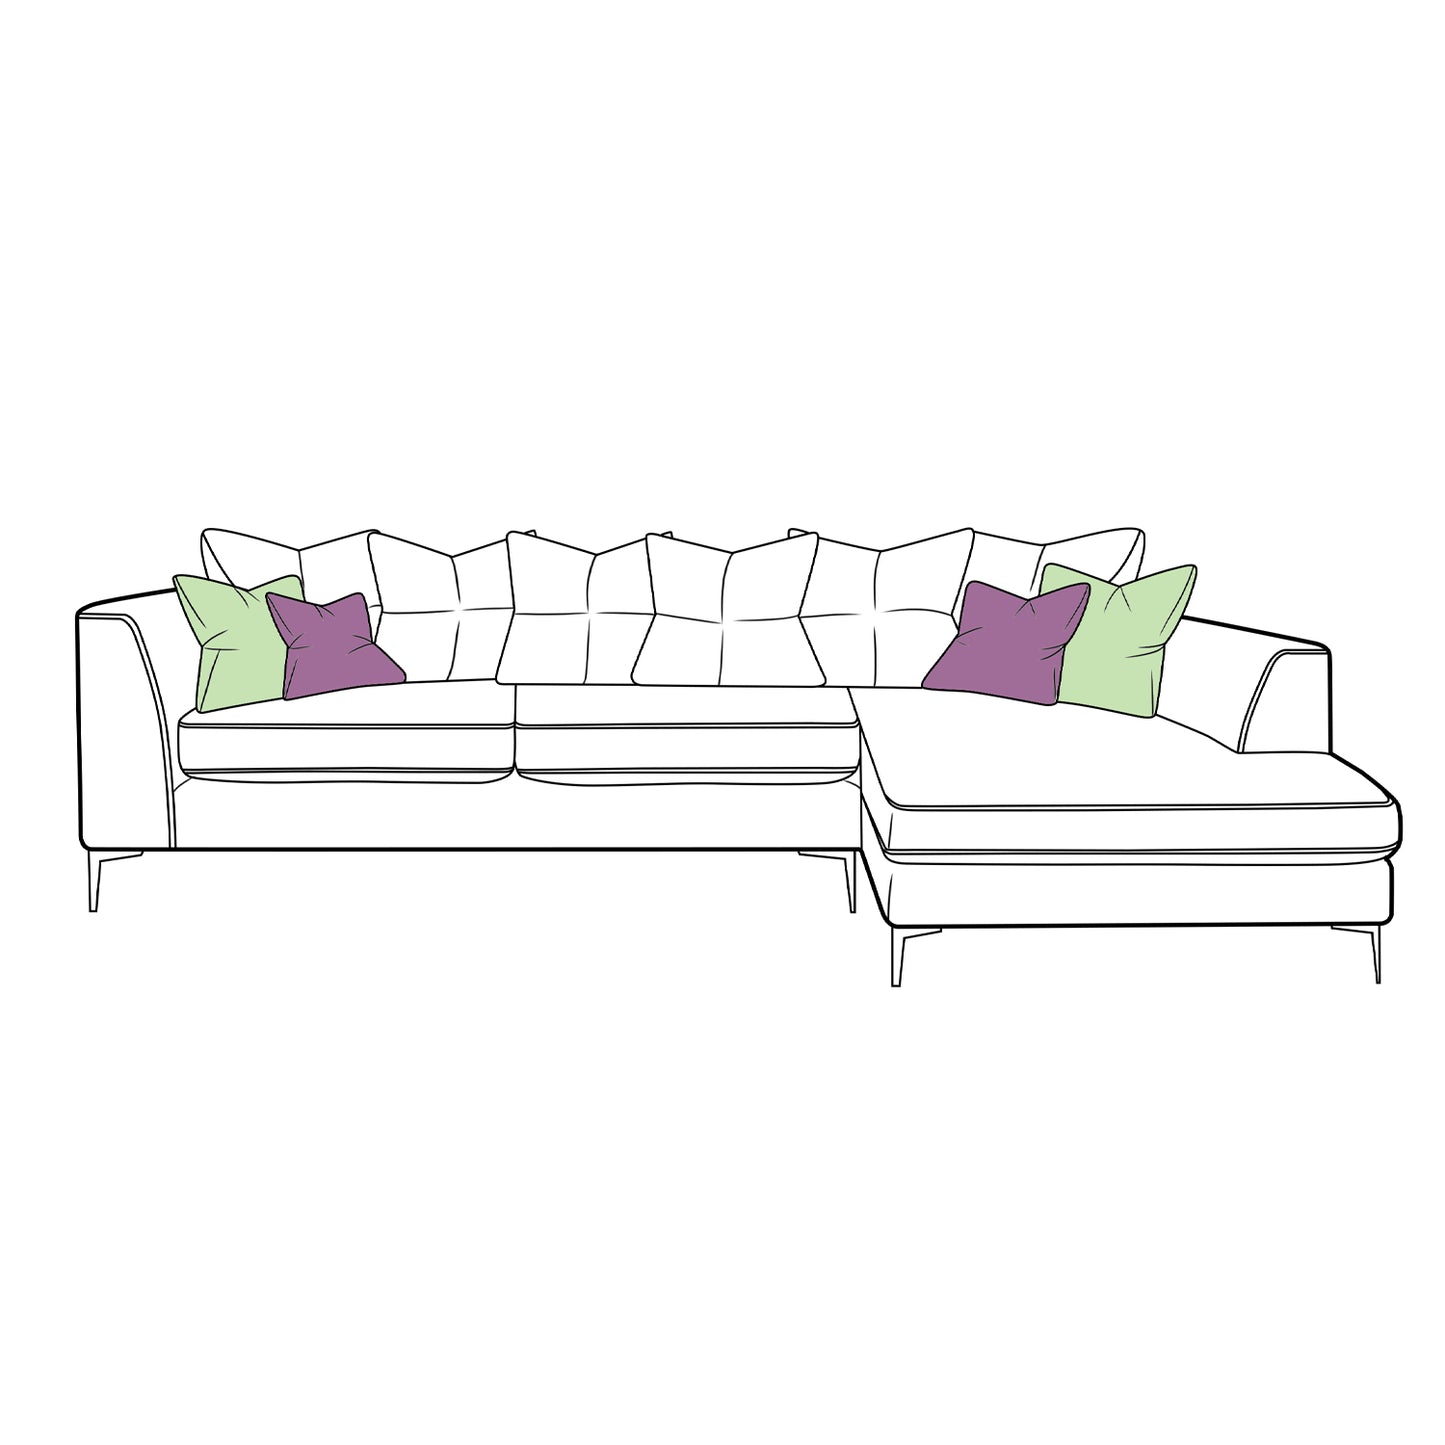 Finley Sofa - Small Chaise Scatter Back